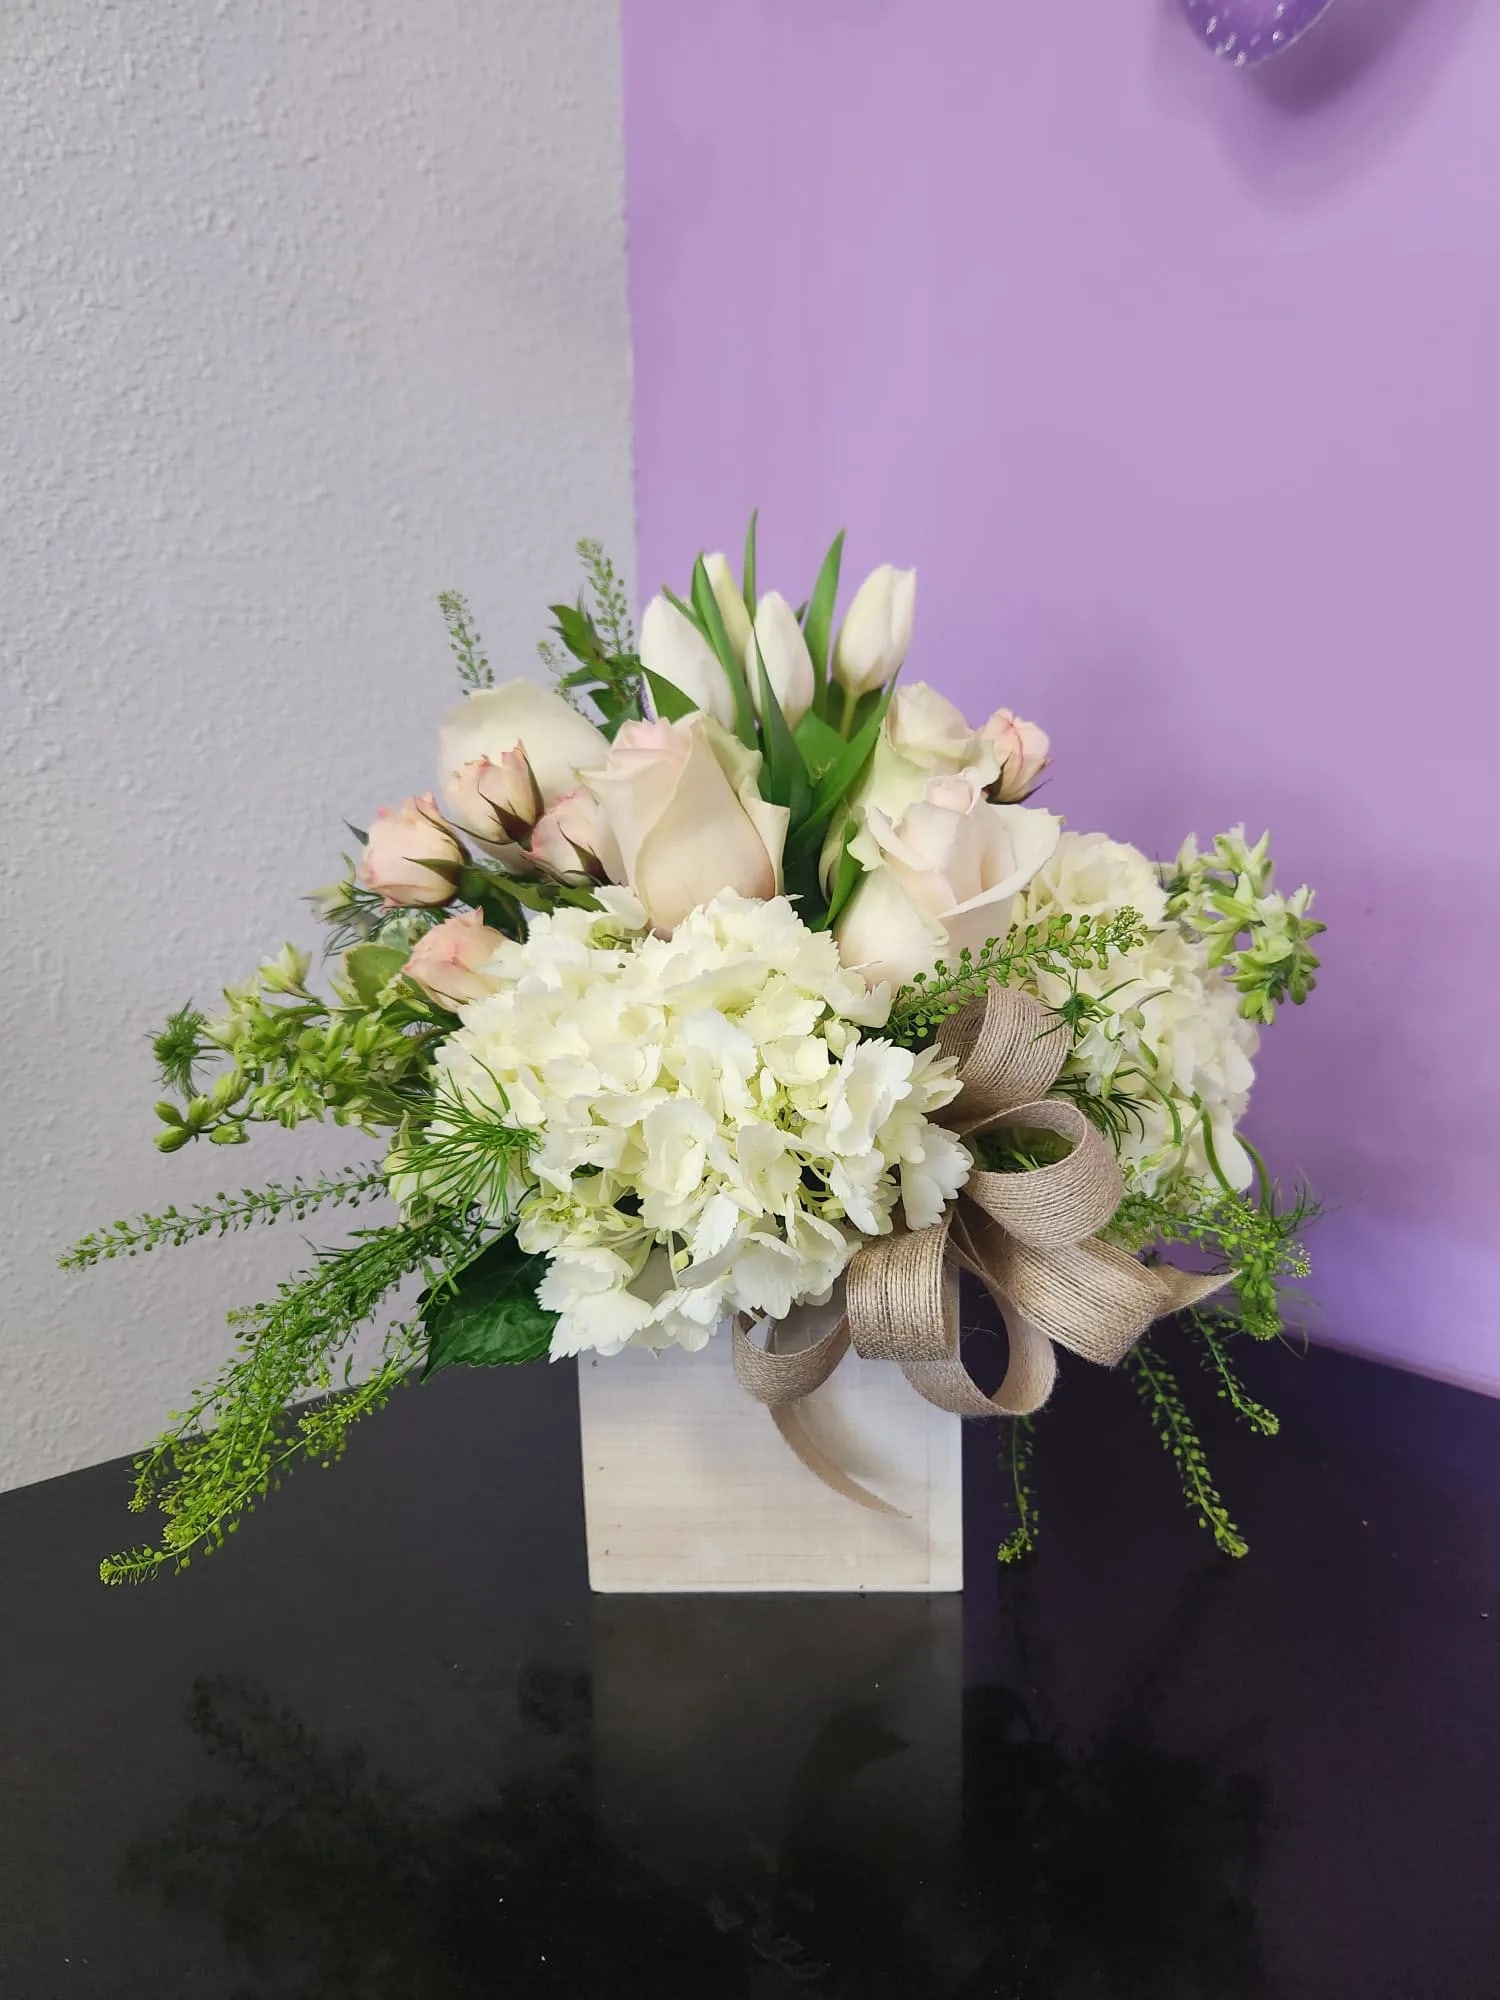 Heartfelt Wishes - This sophisticated arrangement features an elegant mix of white and cream blooms, including roses, tulips, and hydrangeas, arranged in a sleek box. The perfect gift to express love and appreciation on Valentine's Day. This arrangement offers a neutral and timeless expression of love and is sure to make a lasting impression.  *Also available with red roses